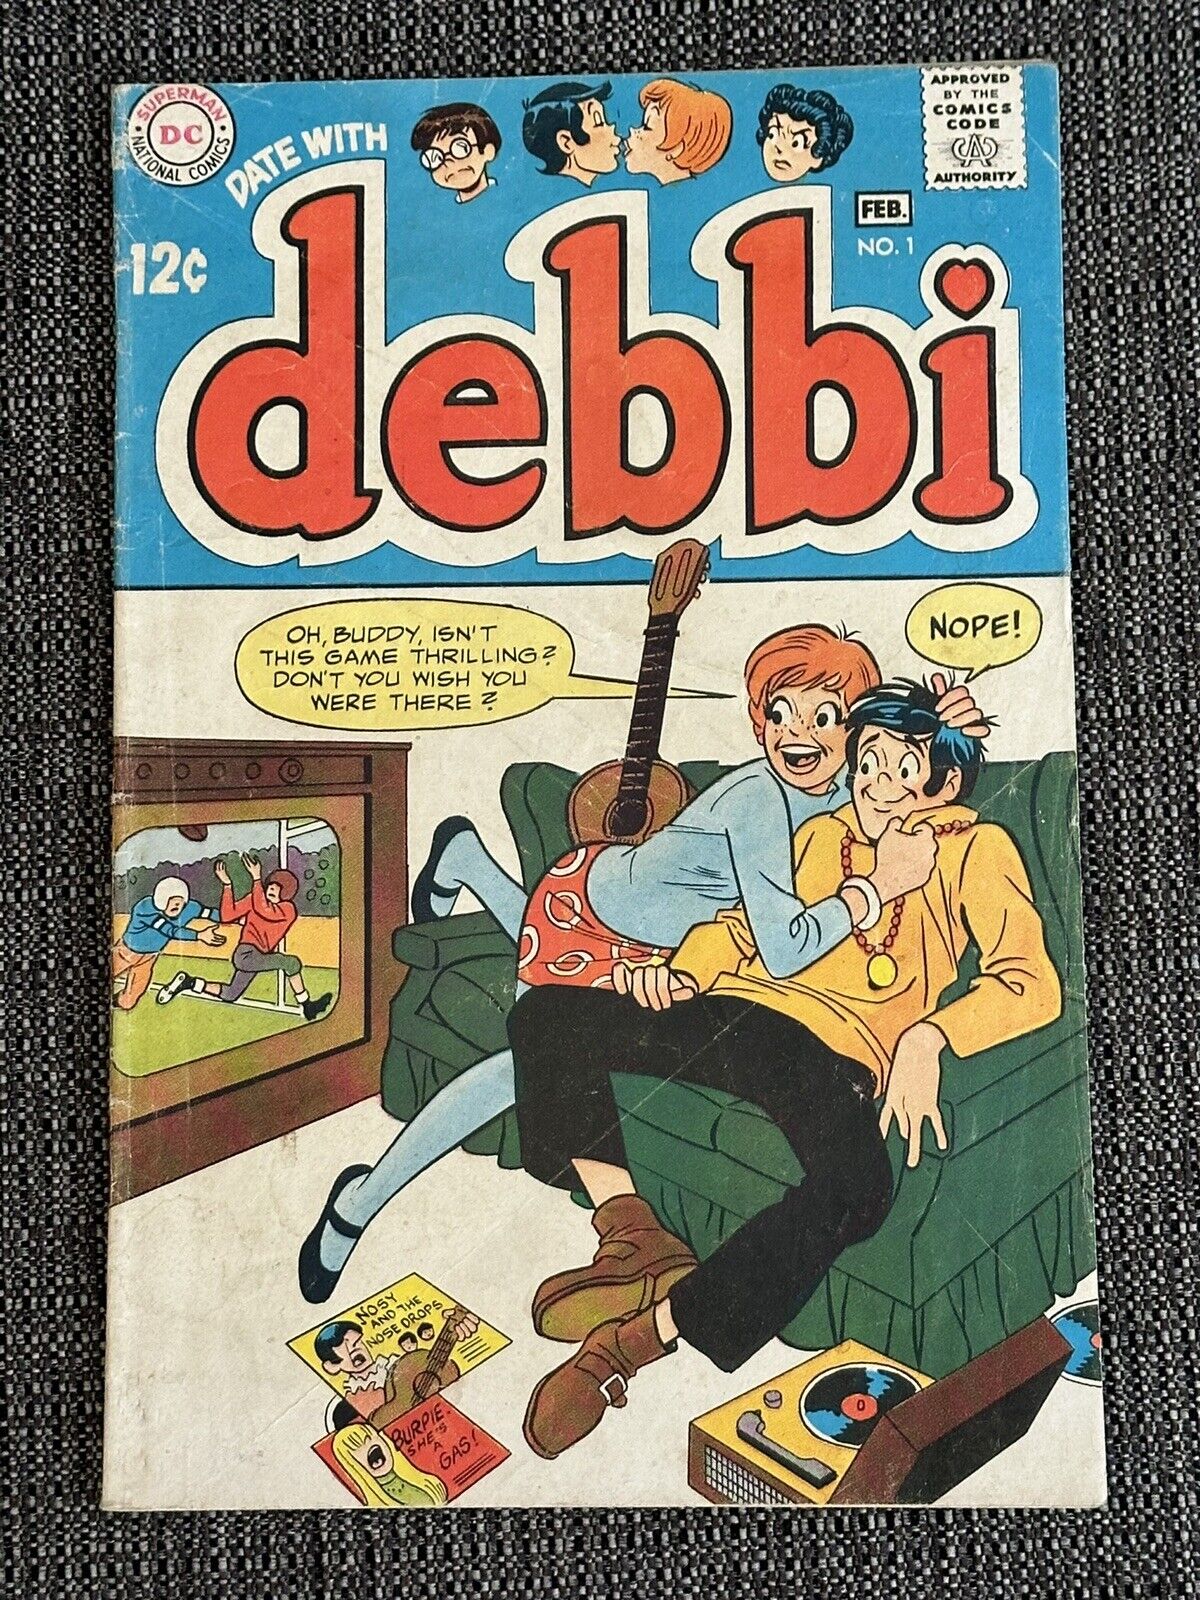 Date with Debbi #1 VG/FN